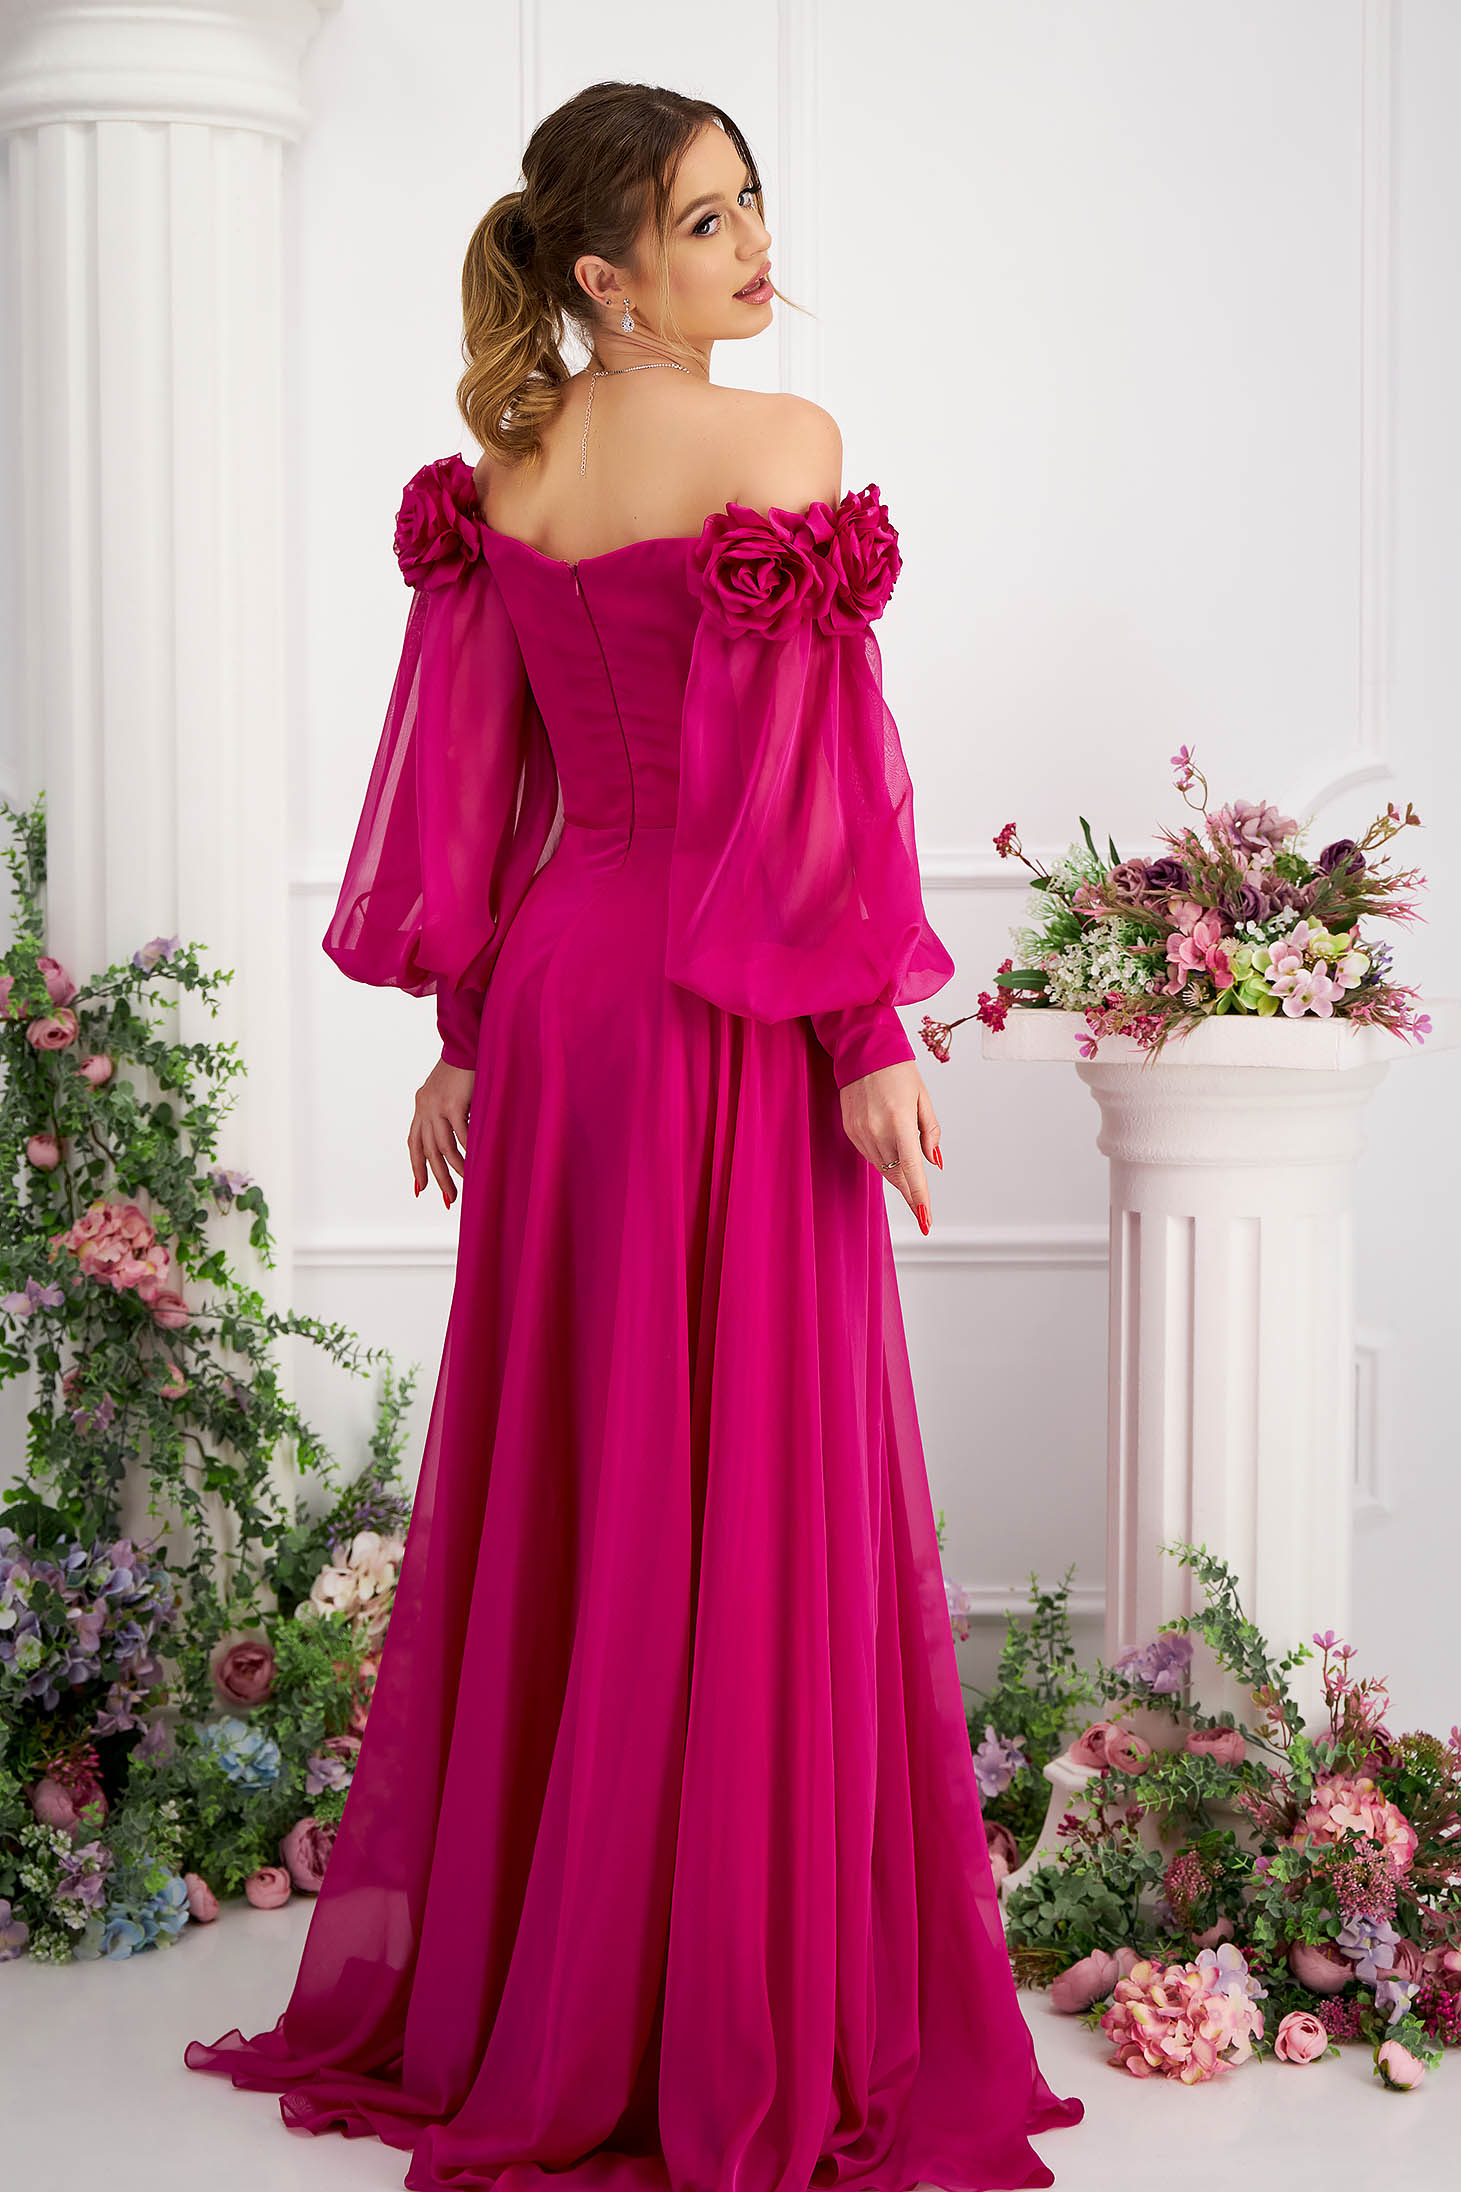 Fuchsia dress from veil fabric from satin fabric texture long cloche naked shoulders with raised flowers 4 - StarShinerS.com